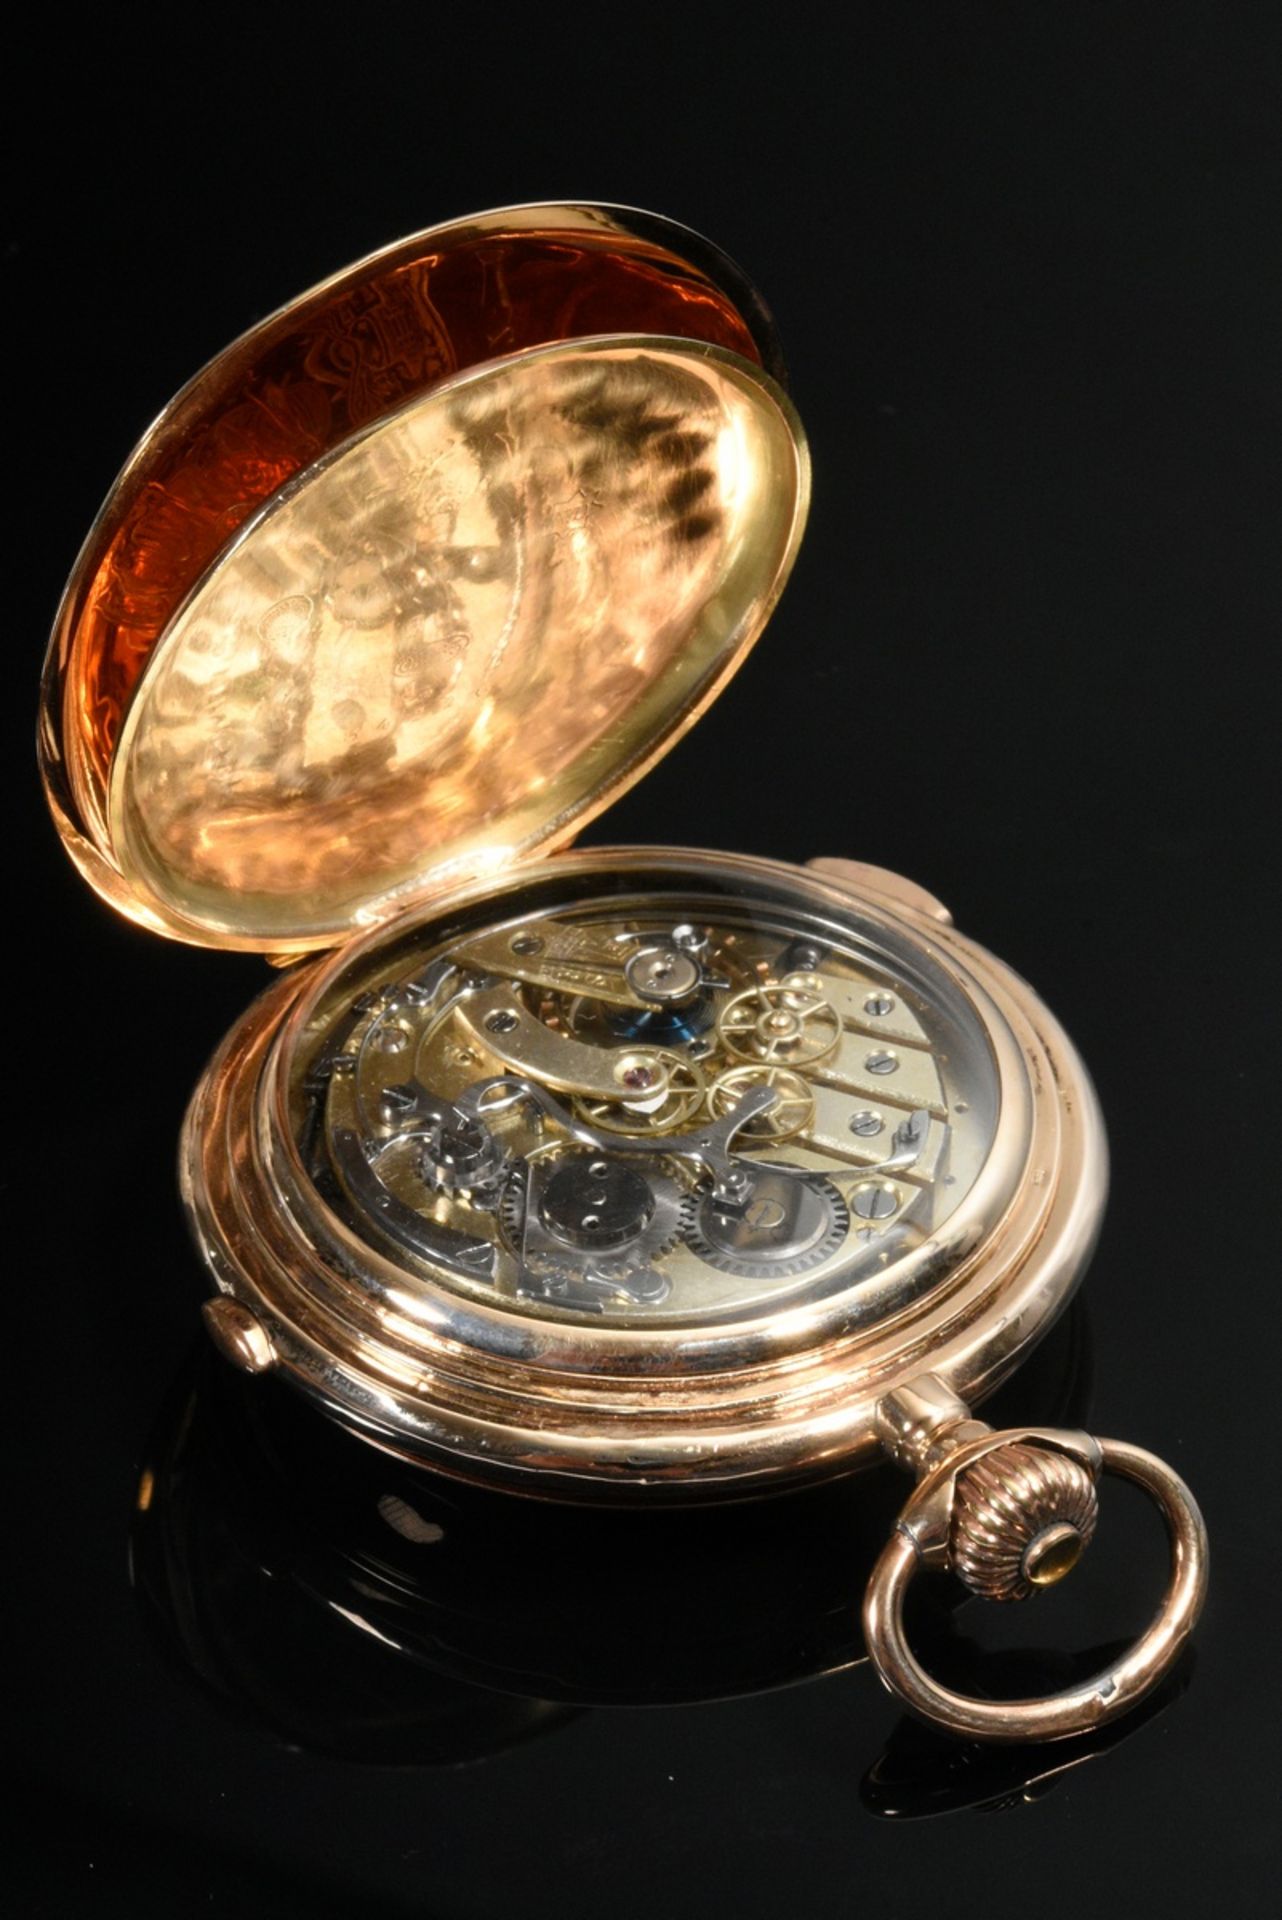 Red gold 585 three-cover pocket watch, chronograph, quarter repeater, seconds stop function, small  - Image 7 of 10